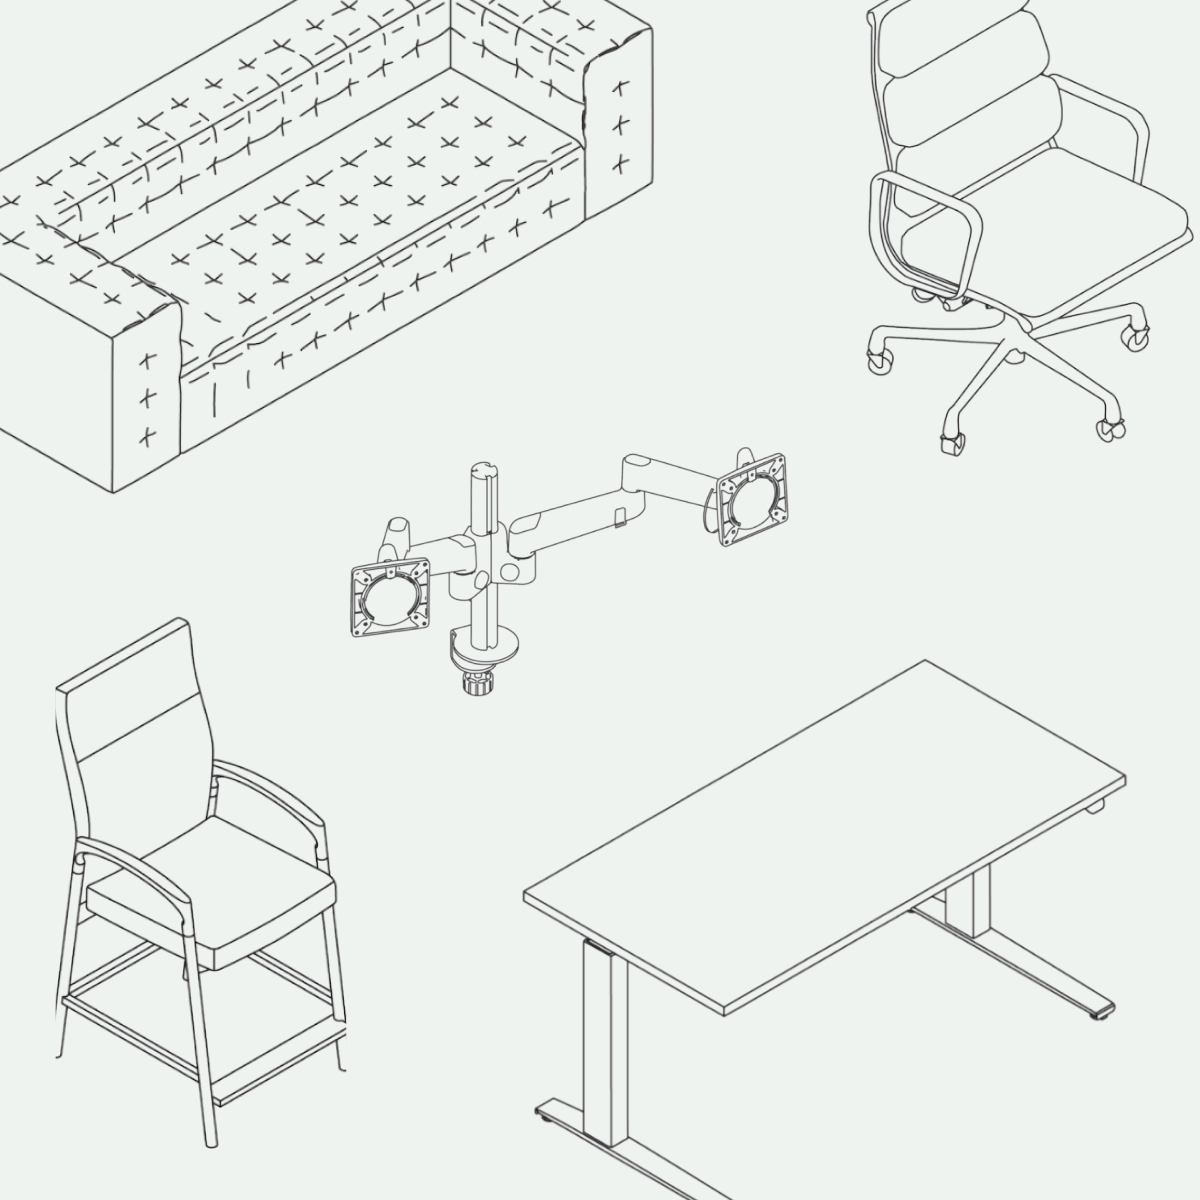 Product model line drawings